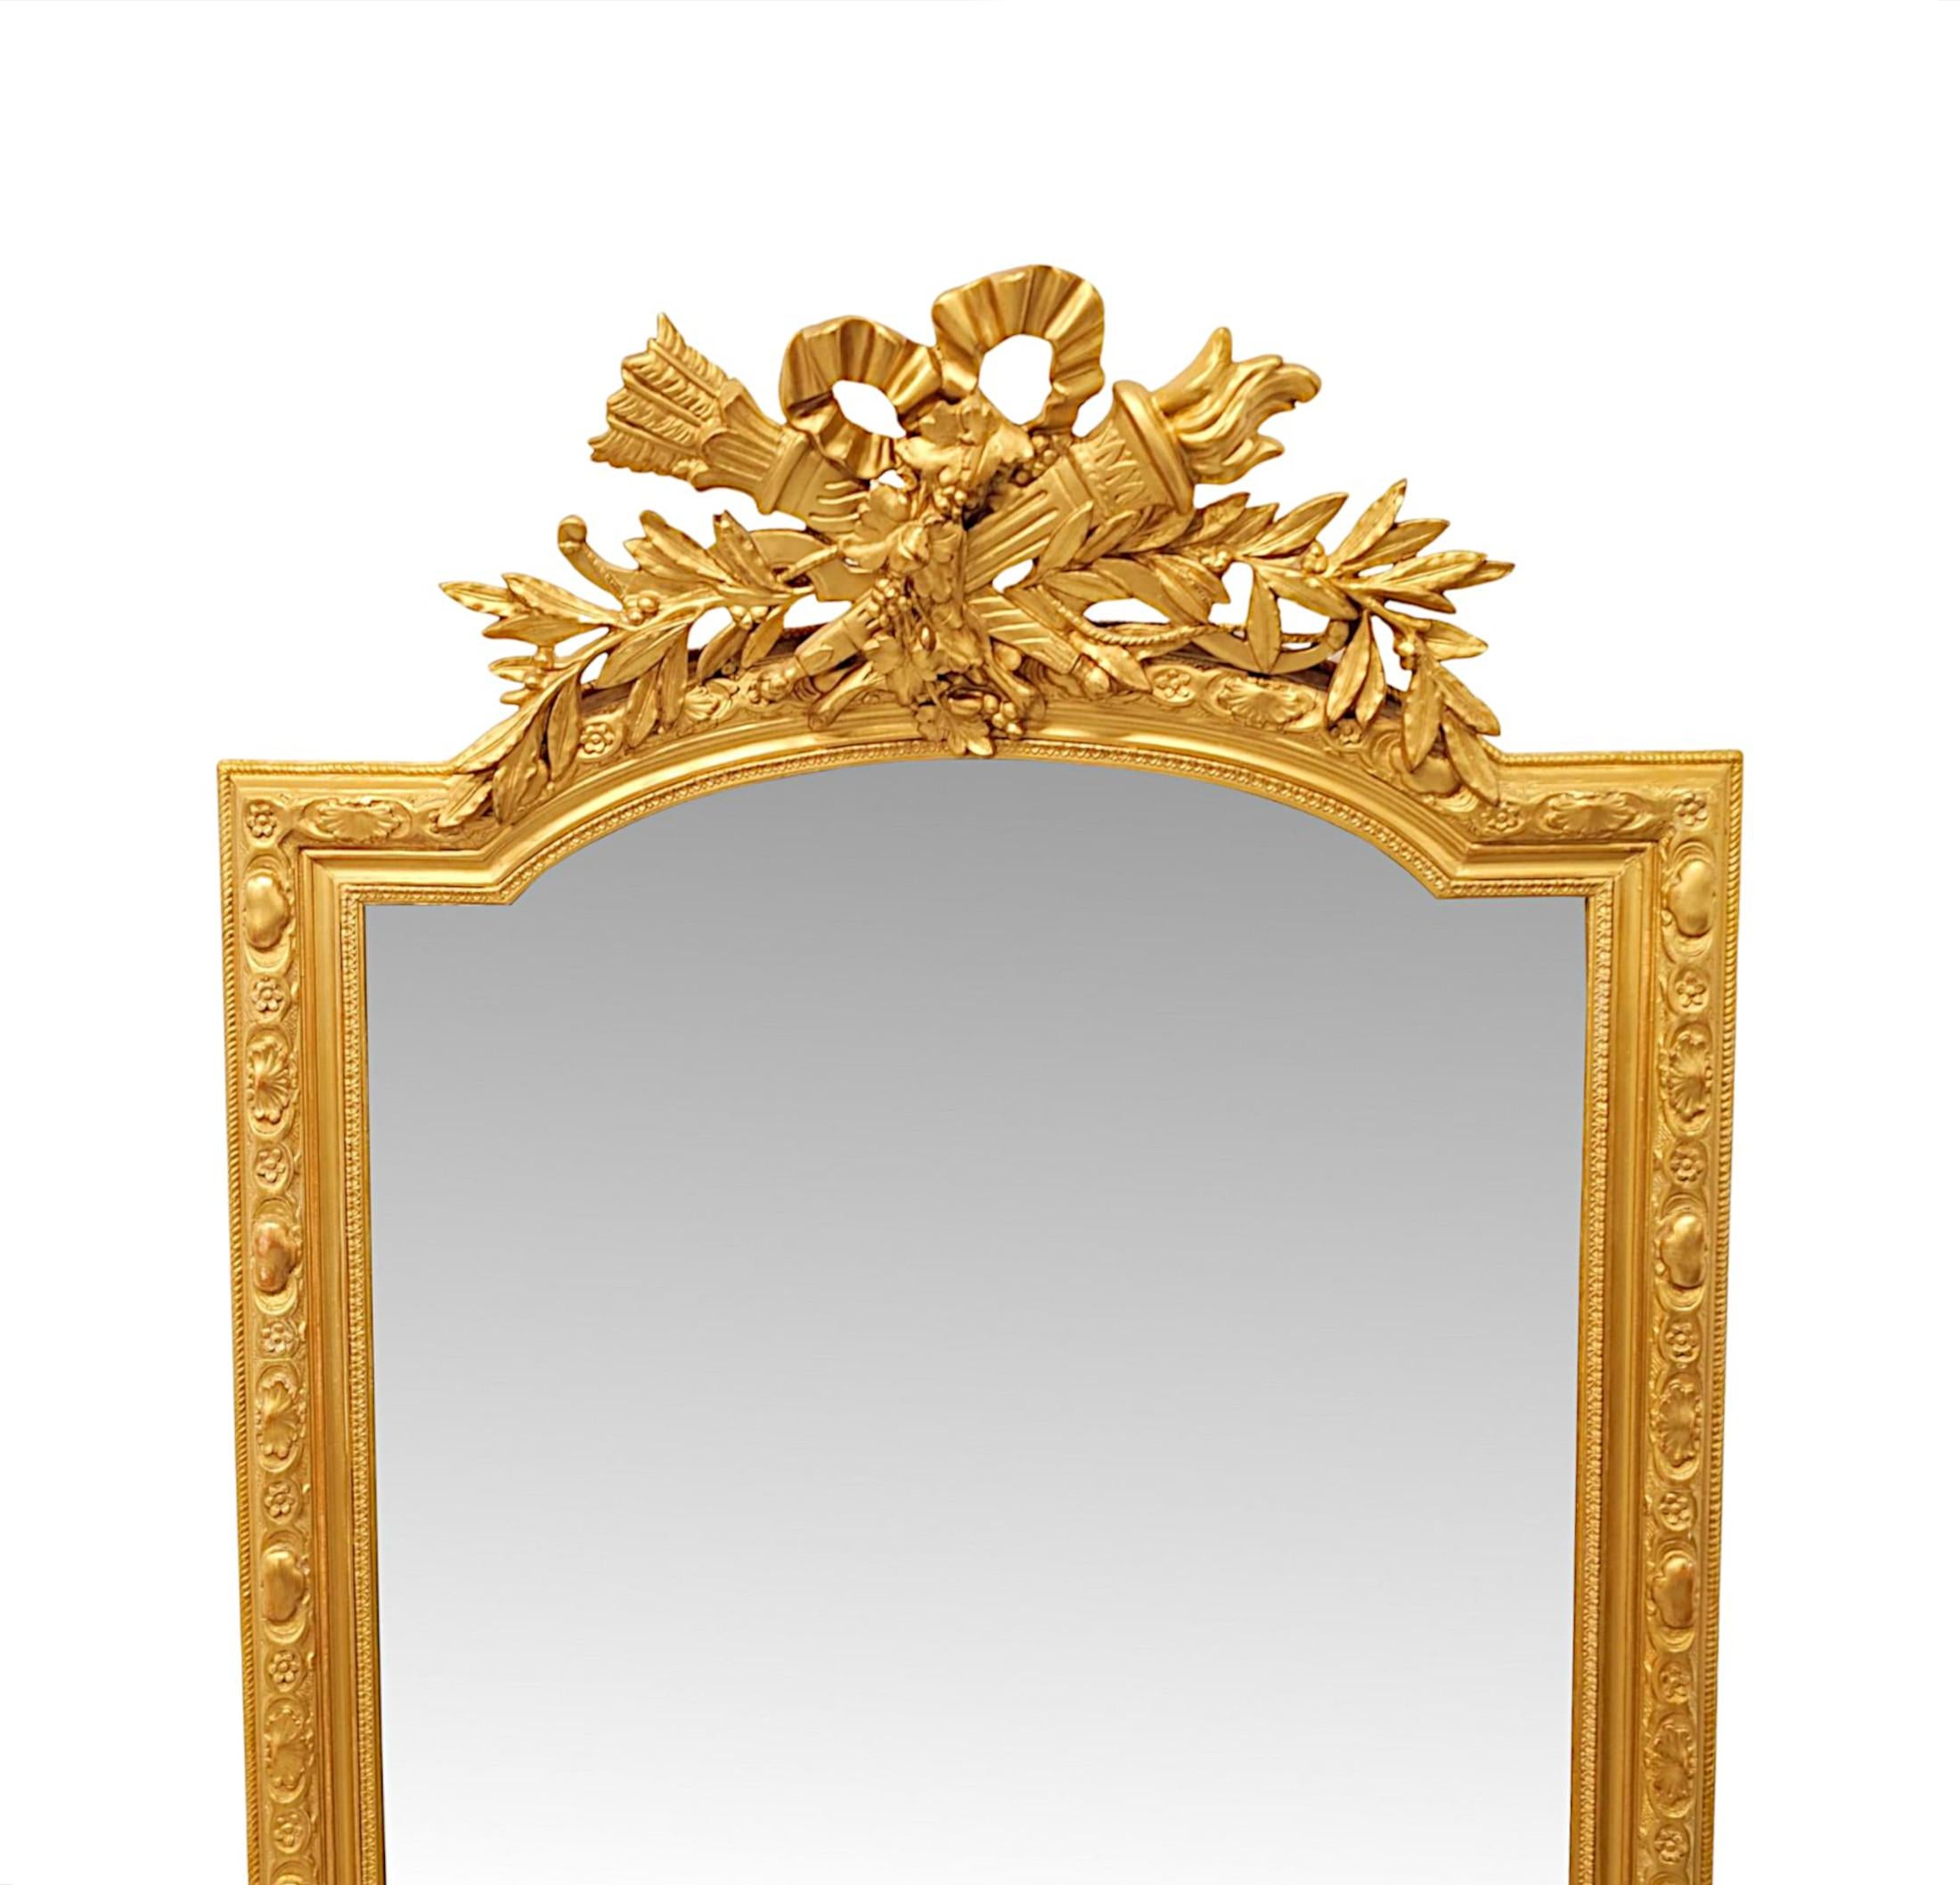 A very 19th Century giltwood pier or dressing mirror of tall proportions and exceptional quality.  The shaped, bevelled mirror glass plate is set within a stunningly hand carved, moulded and fluted giltwood frame with gorgeous flowerhead, stylised